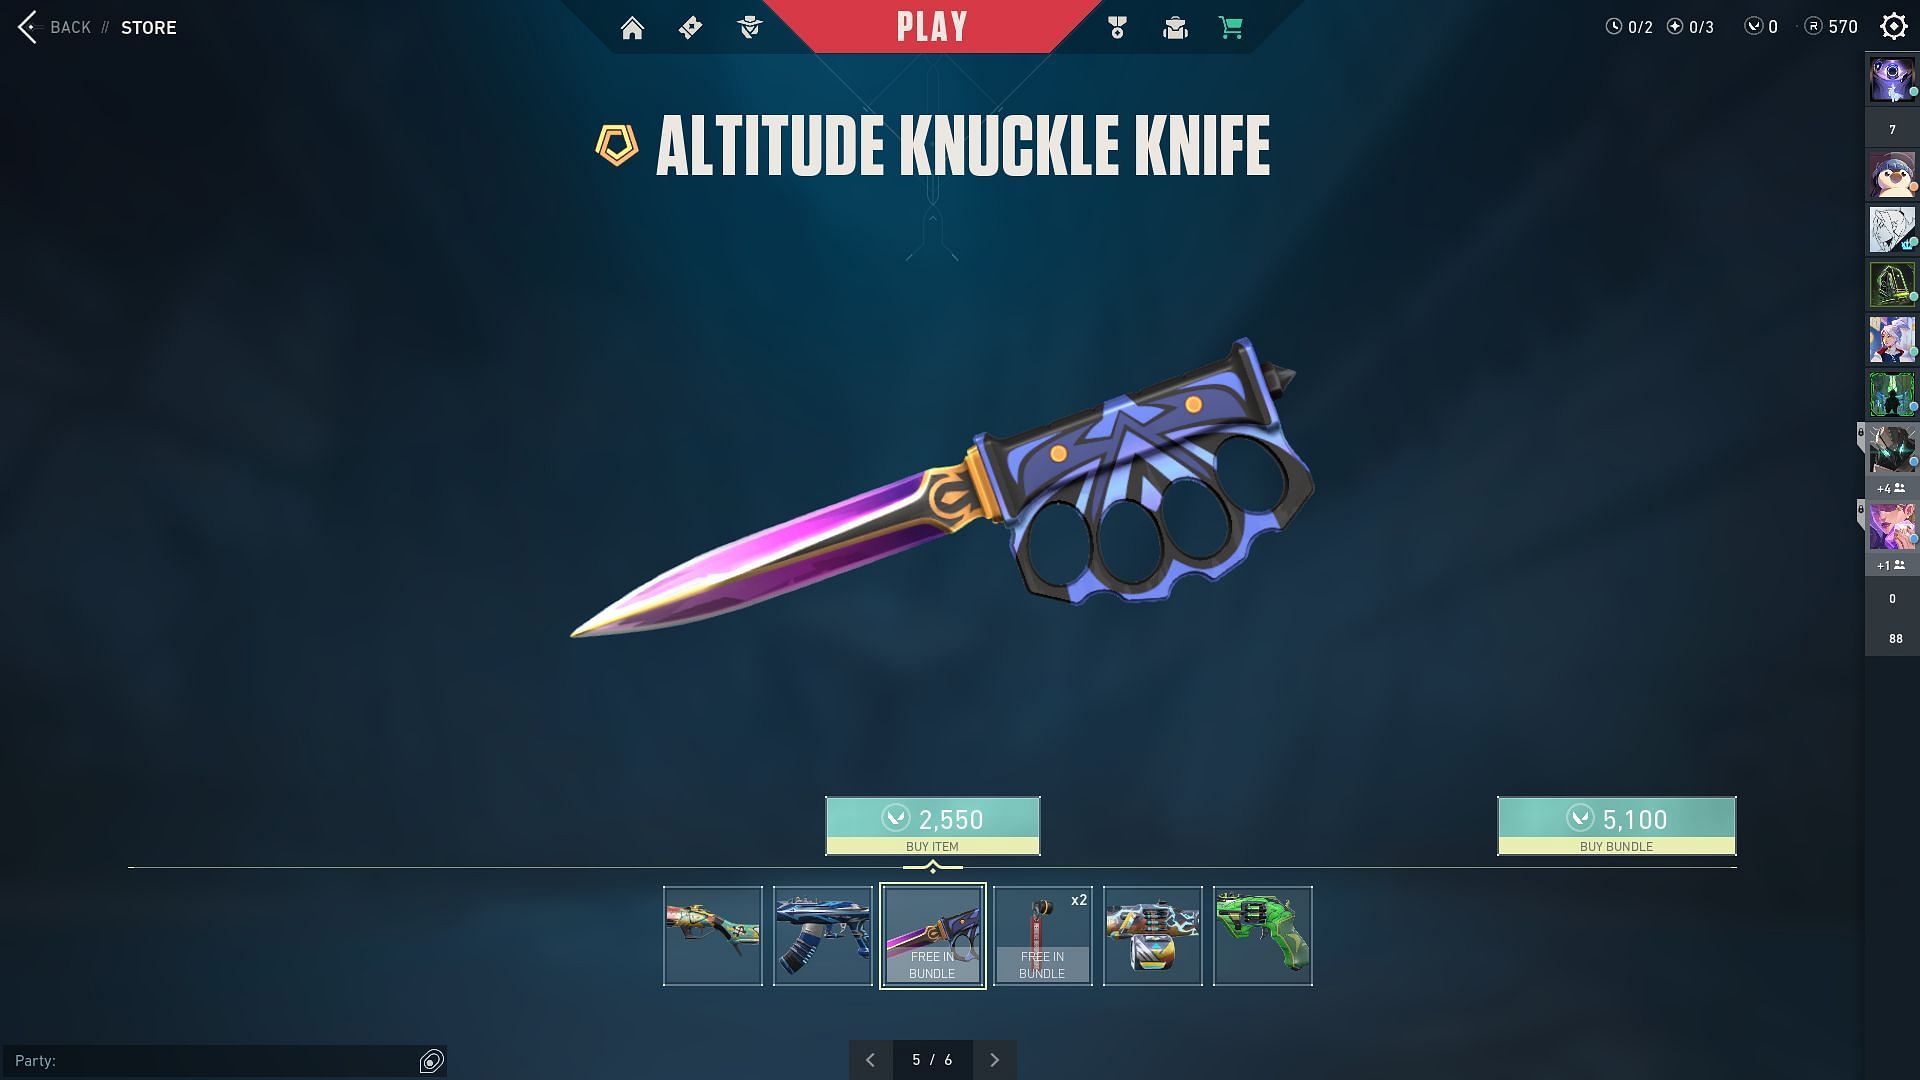 Altitude Knuckle Knife in Valorant store (Image via Riot Games)